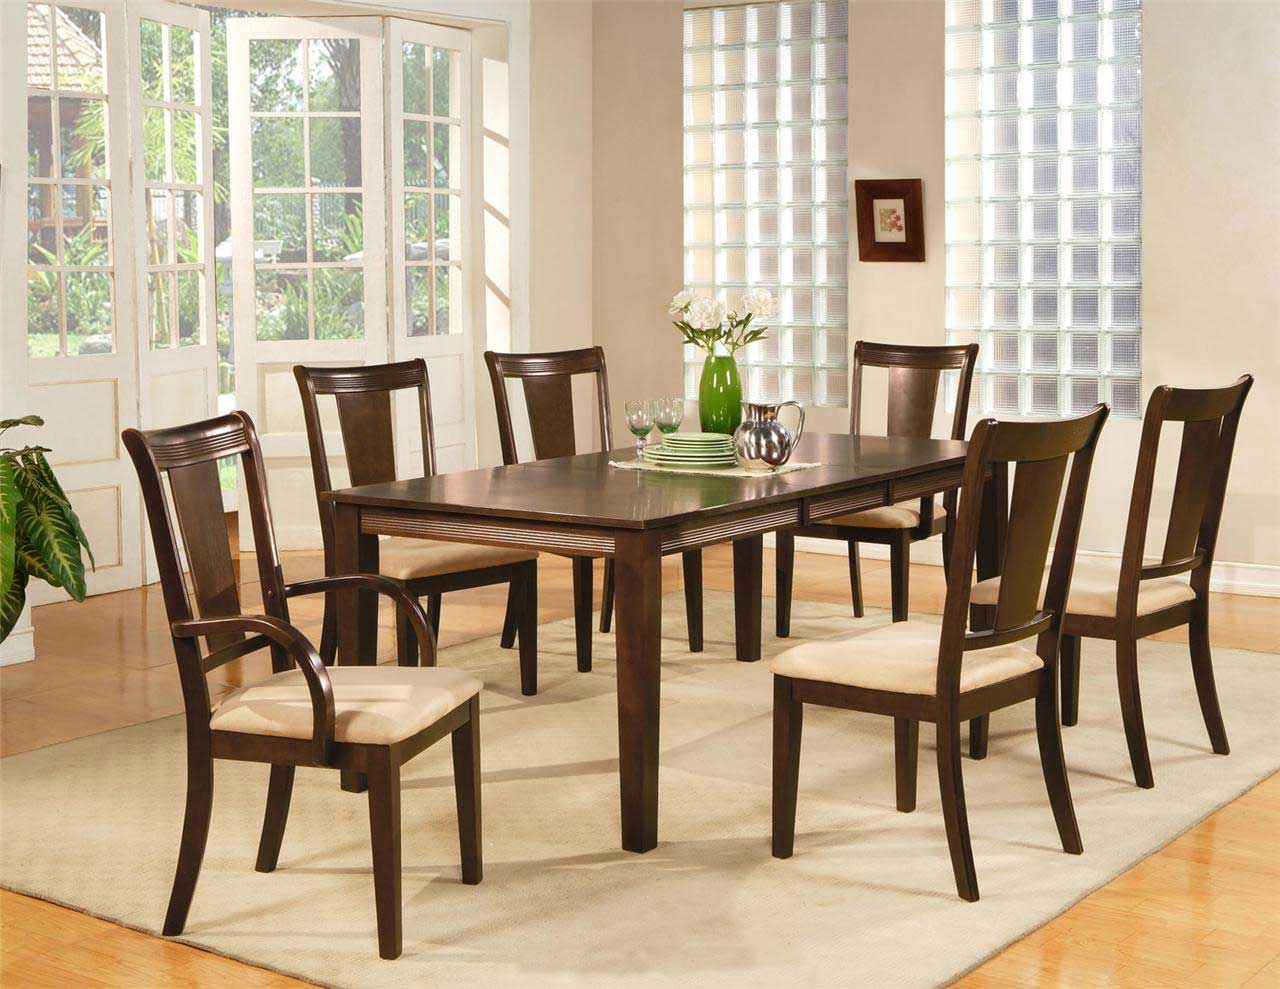 simple family dining room ideas